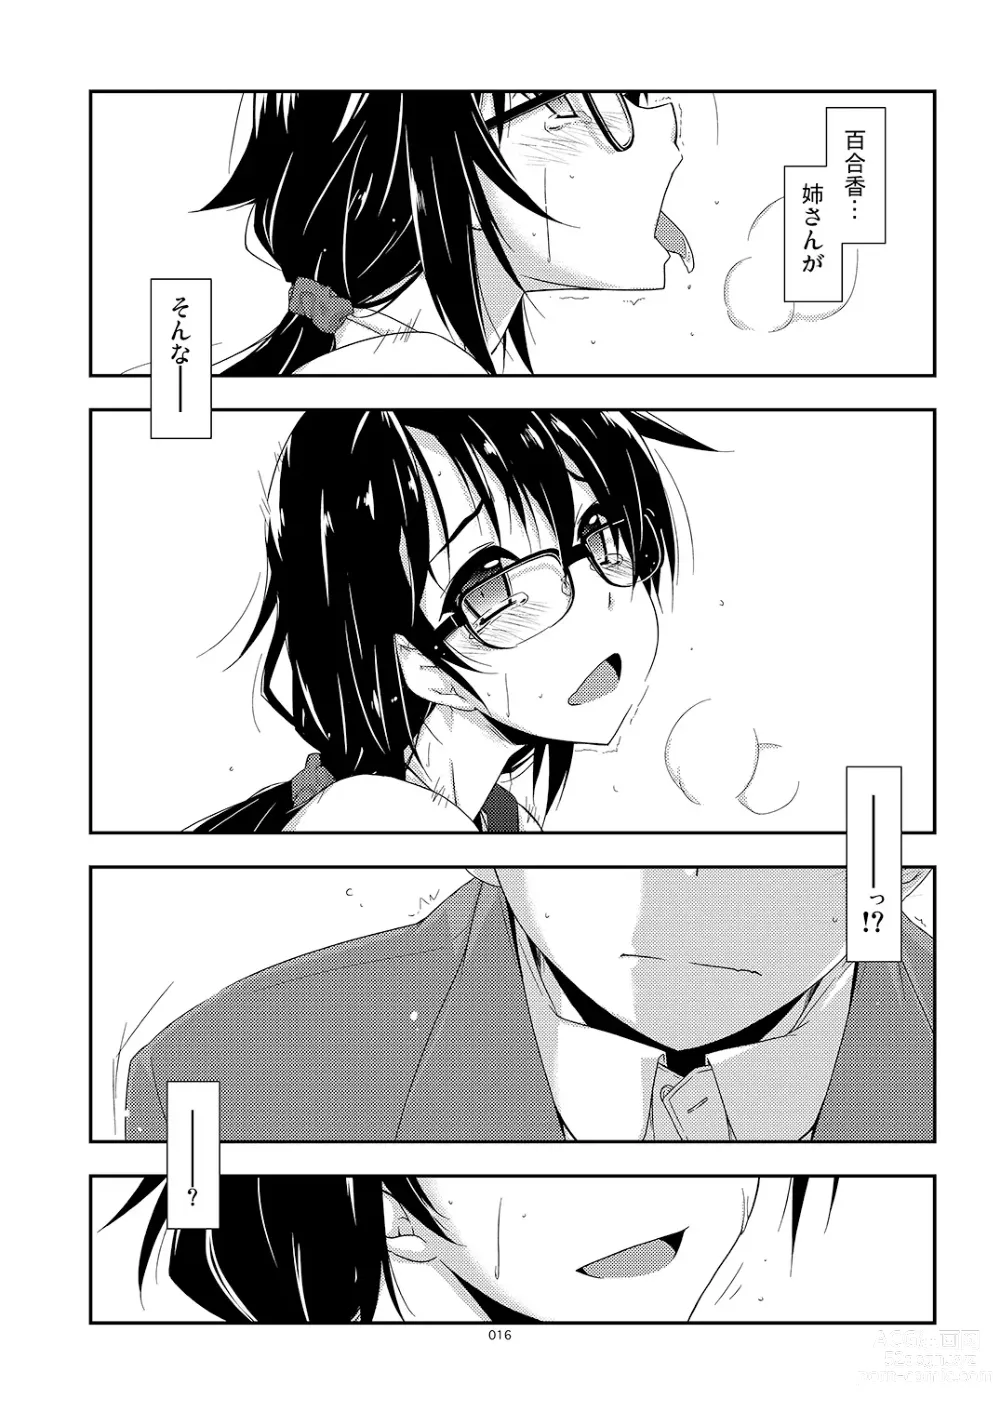 Page 16 of doujinshi Rouka Soushuuhen - Tinkered Flower Perfect Collection